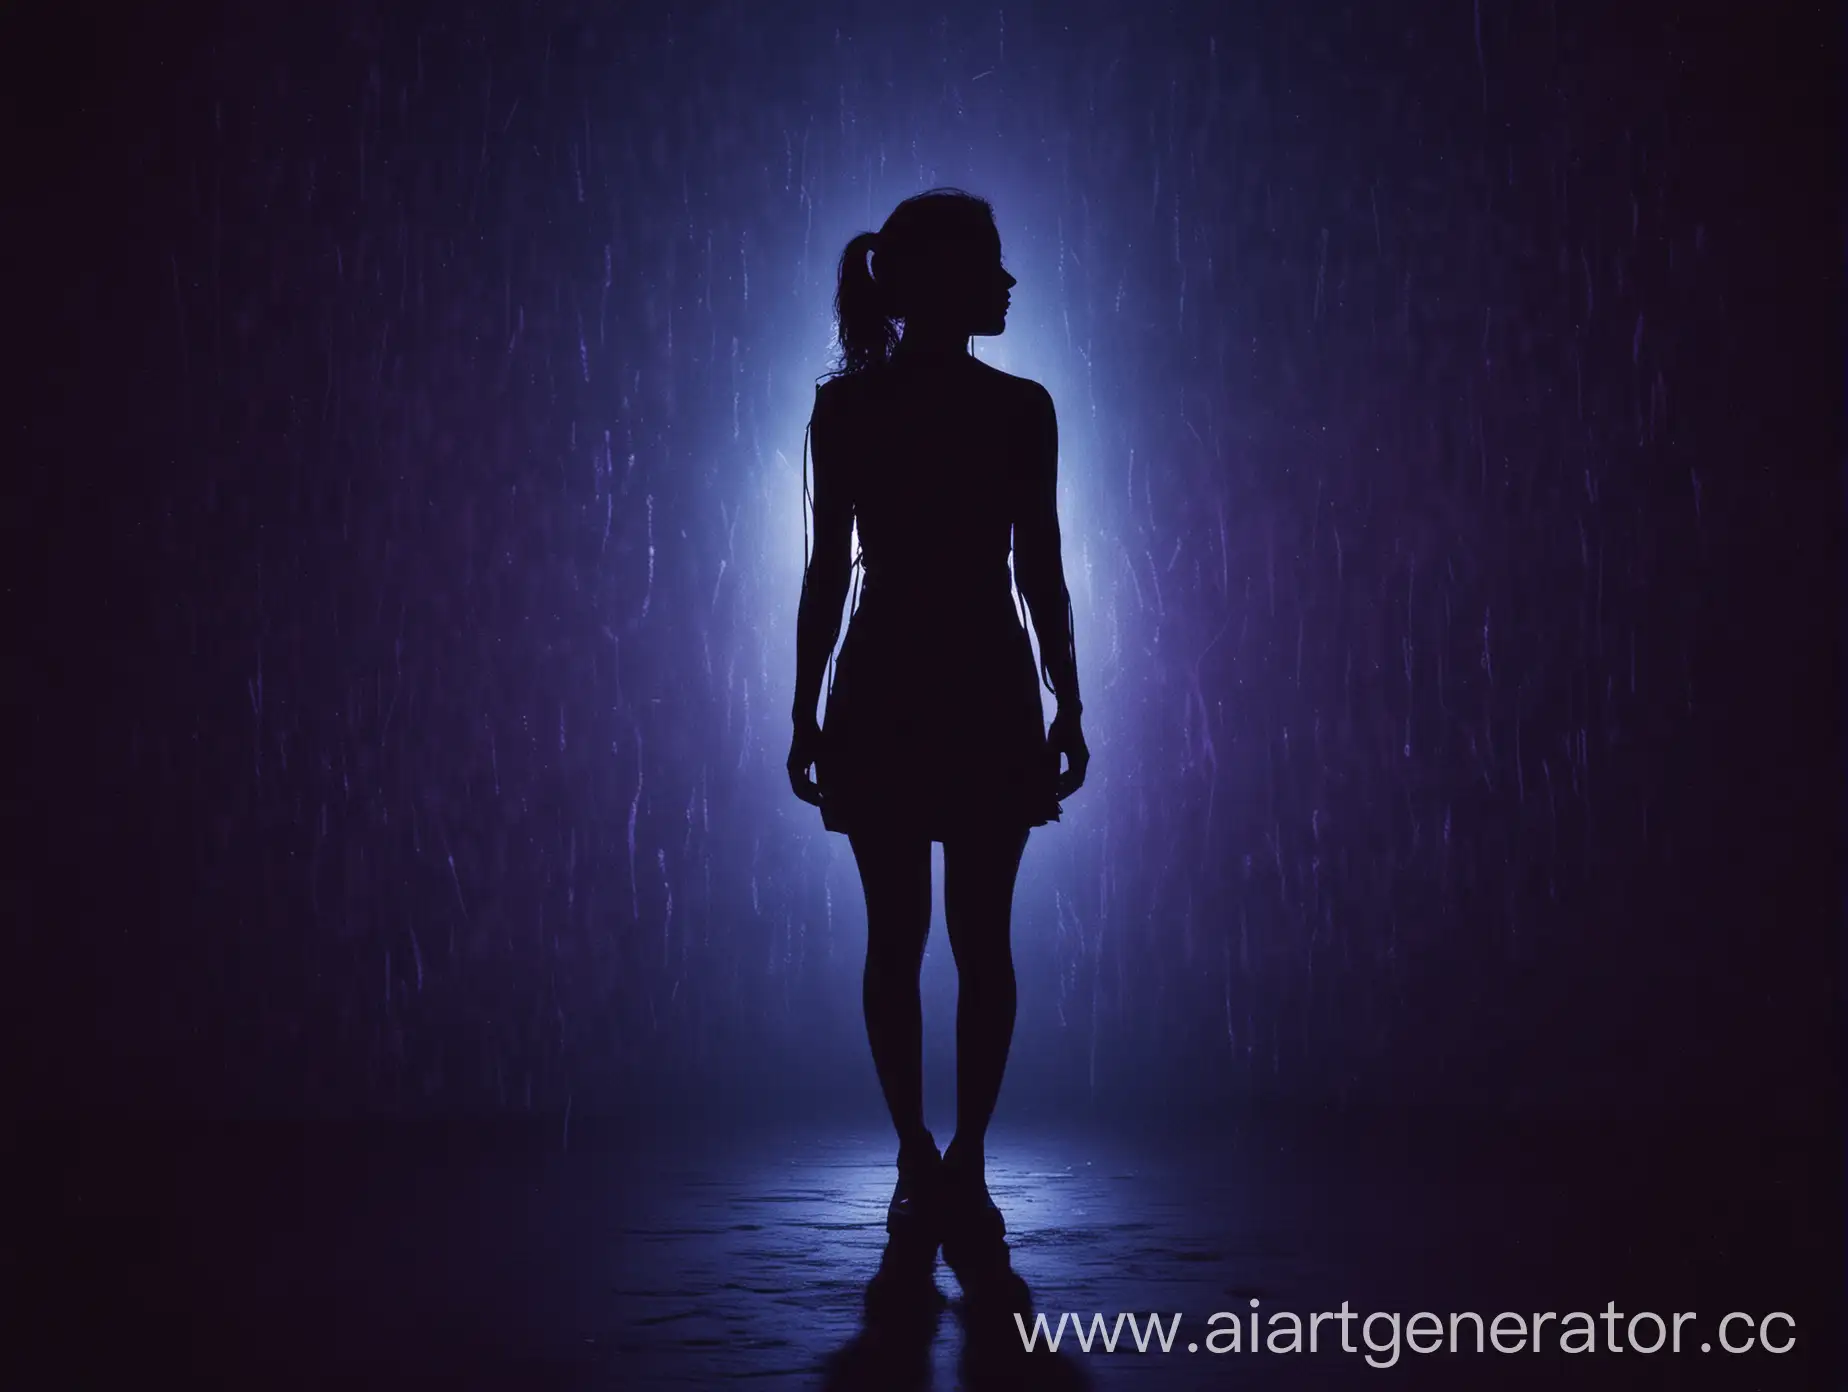 Visual Elements: A silhouette of a person standing in a spotlight, surrounded by shadows that seem to reach out towards them. The background is a gradient of deep blues and purples, symbolizing the depth of night and the complexity of emotions. Around the edges, faint traces of handwritten lyrics from the song give it a personal touch.
Mood: The overall mood is intense and moody, reflecting the inner turmoil and the magnetic, yet toxic attraction described in the lyrics.
